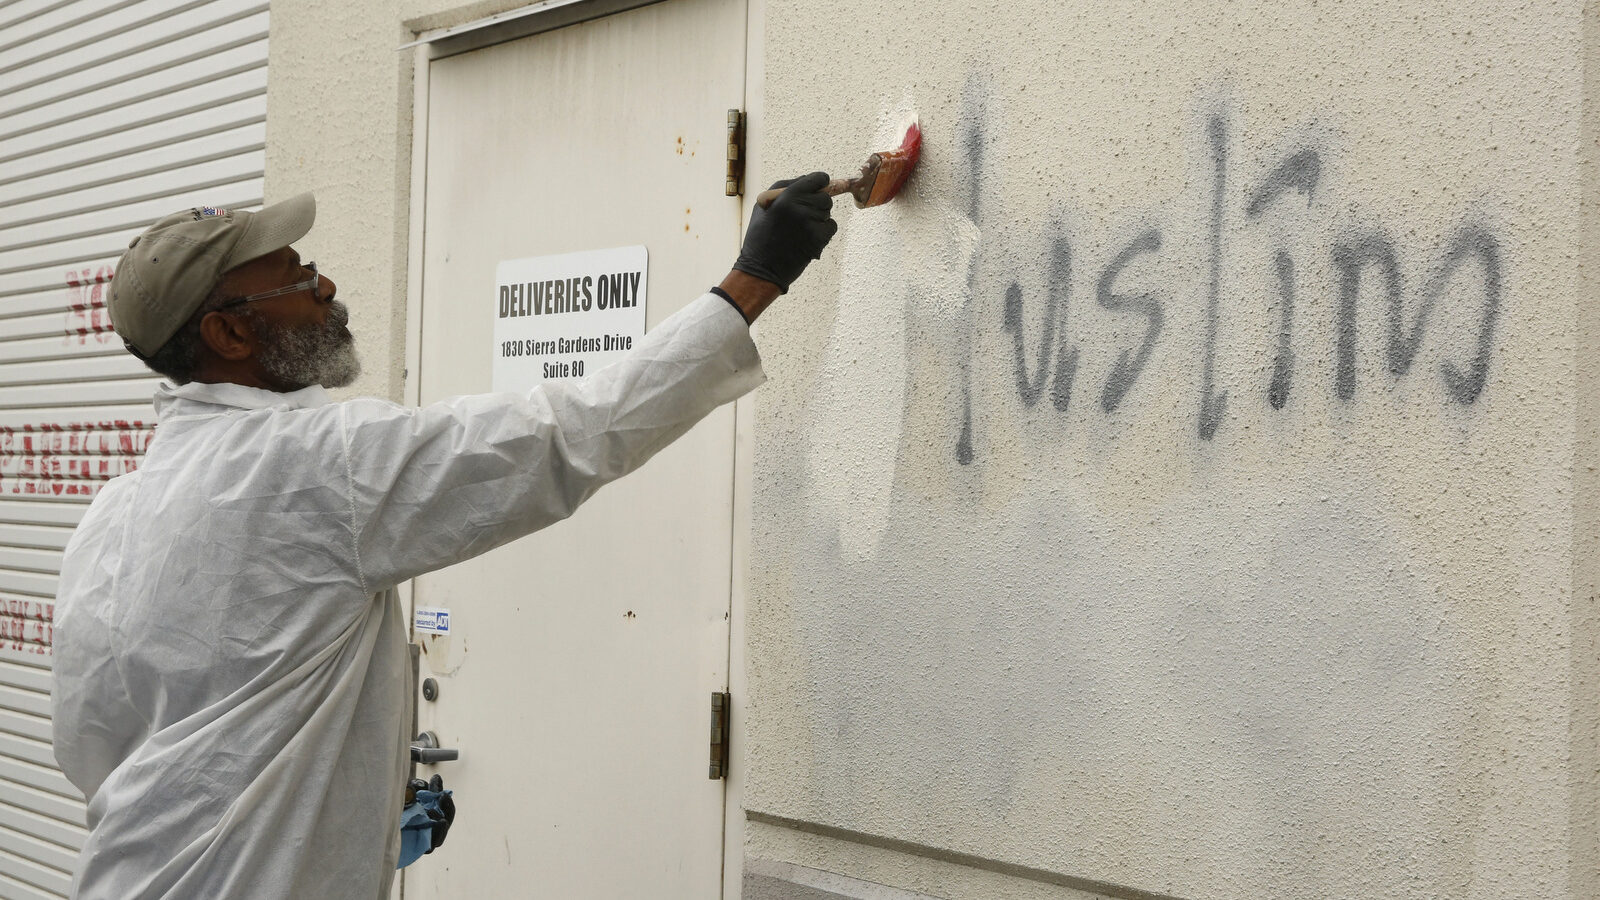 Willie Lawson paints over racist graffiti painted on the side of a mosque in Roseville, Calif. (AP/Rich Pedroncelli)